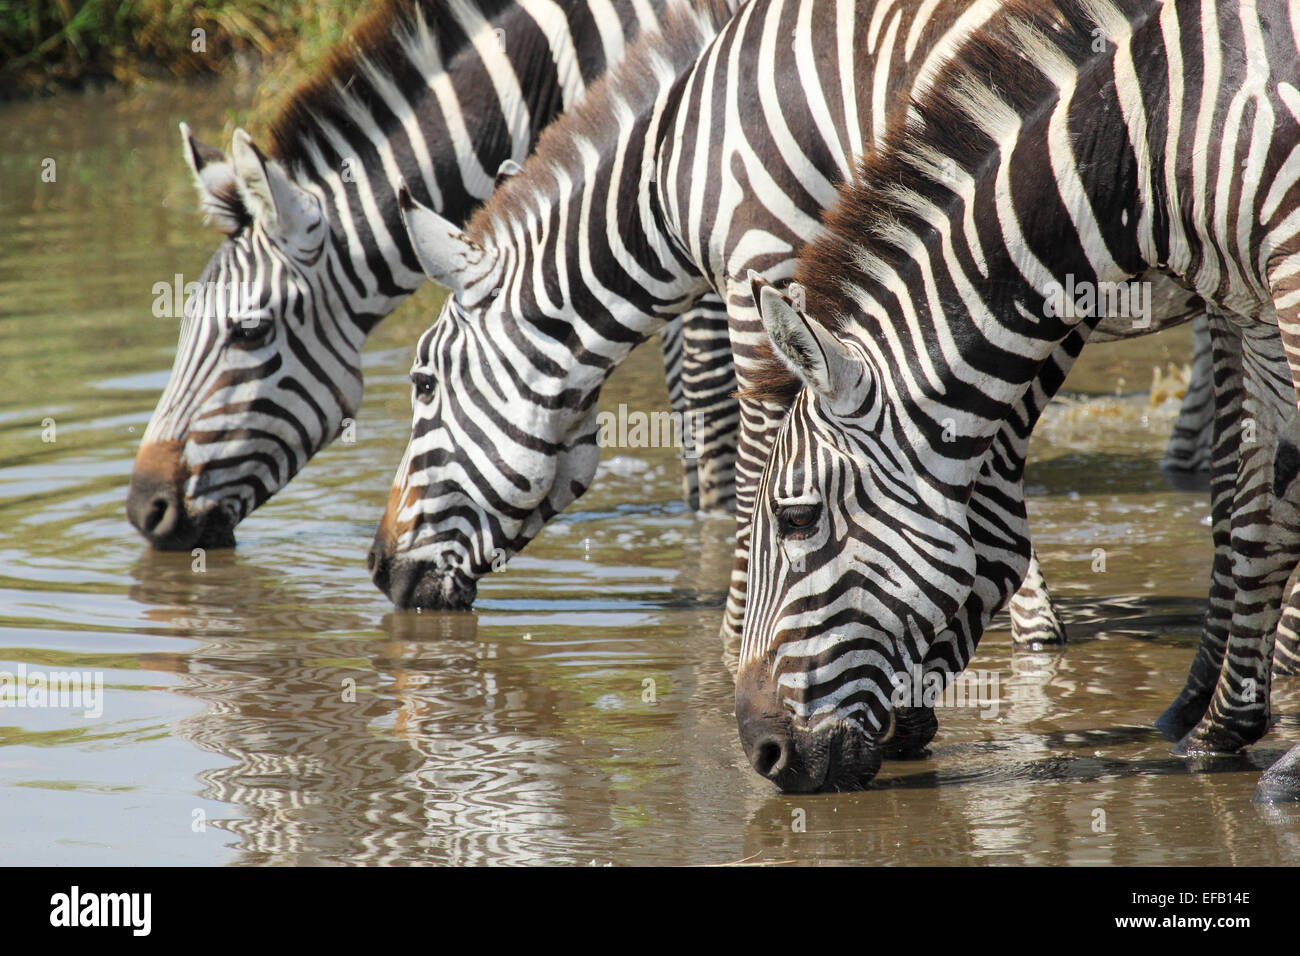 A group of common zebras, Equus Quagga, drinking from a waterhole in Serengeti National Park, Tanzania Stock Photo